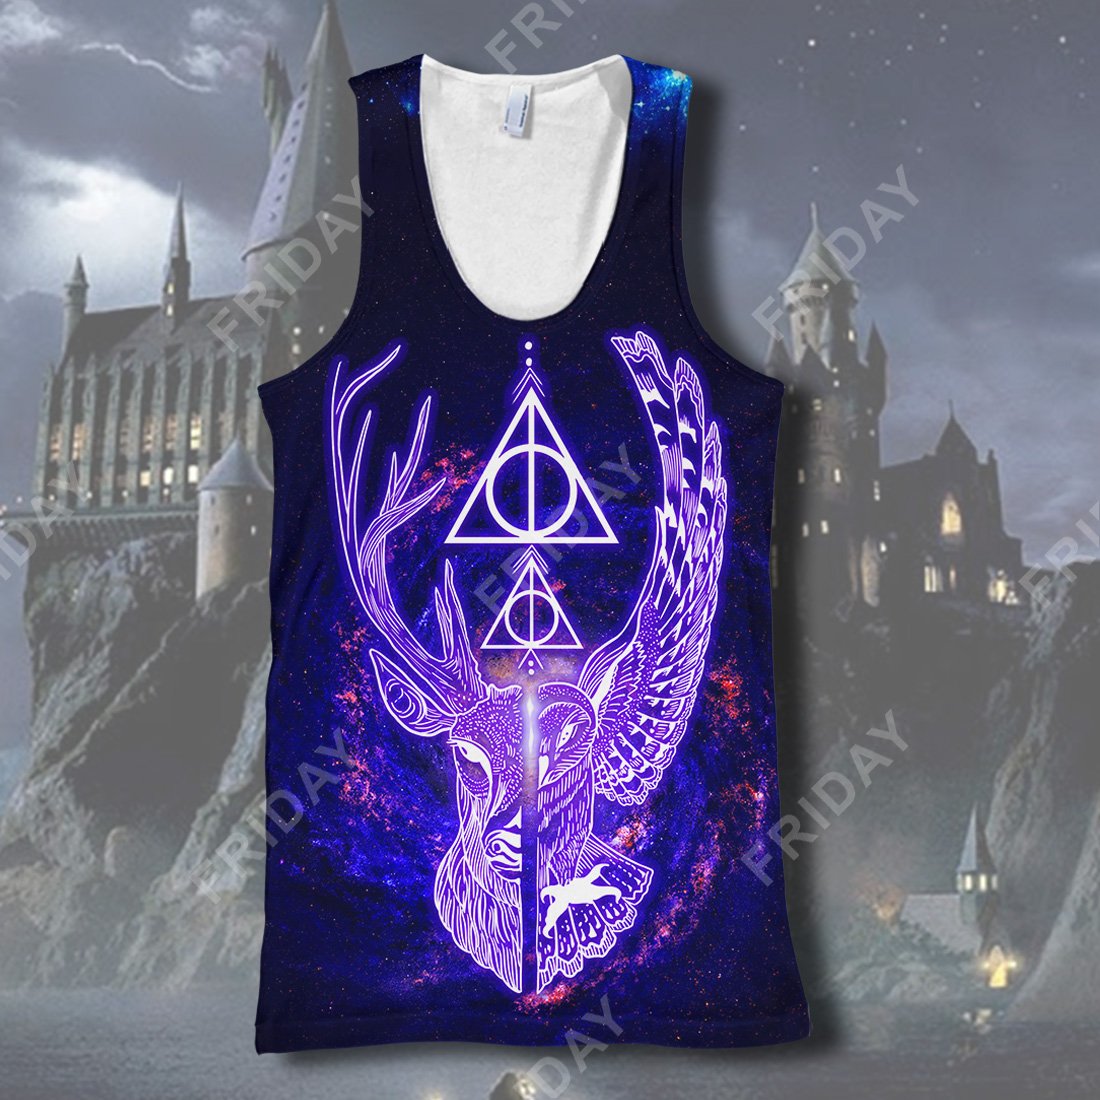 Unifinz HP T-shirt Deathly Hallows Deer And Owl Galaxy T-shirt Awesome High Quality HP Hoodie Sweater Tank 2025